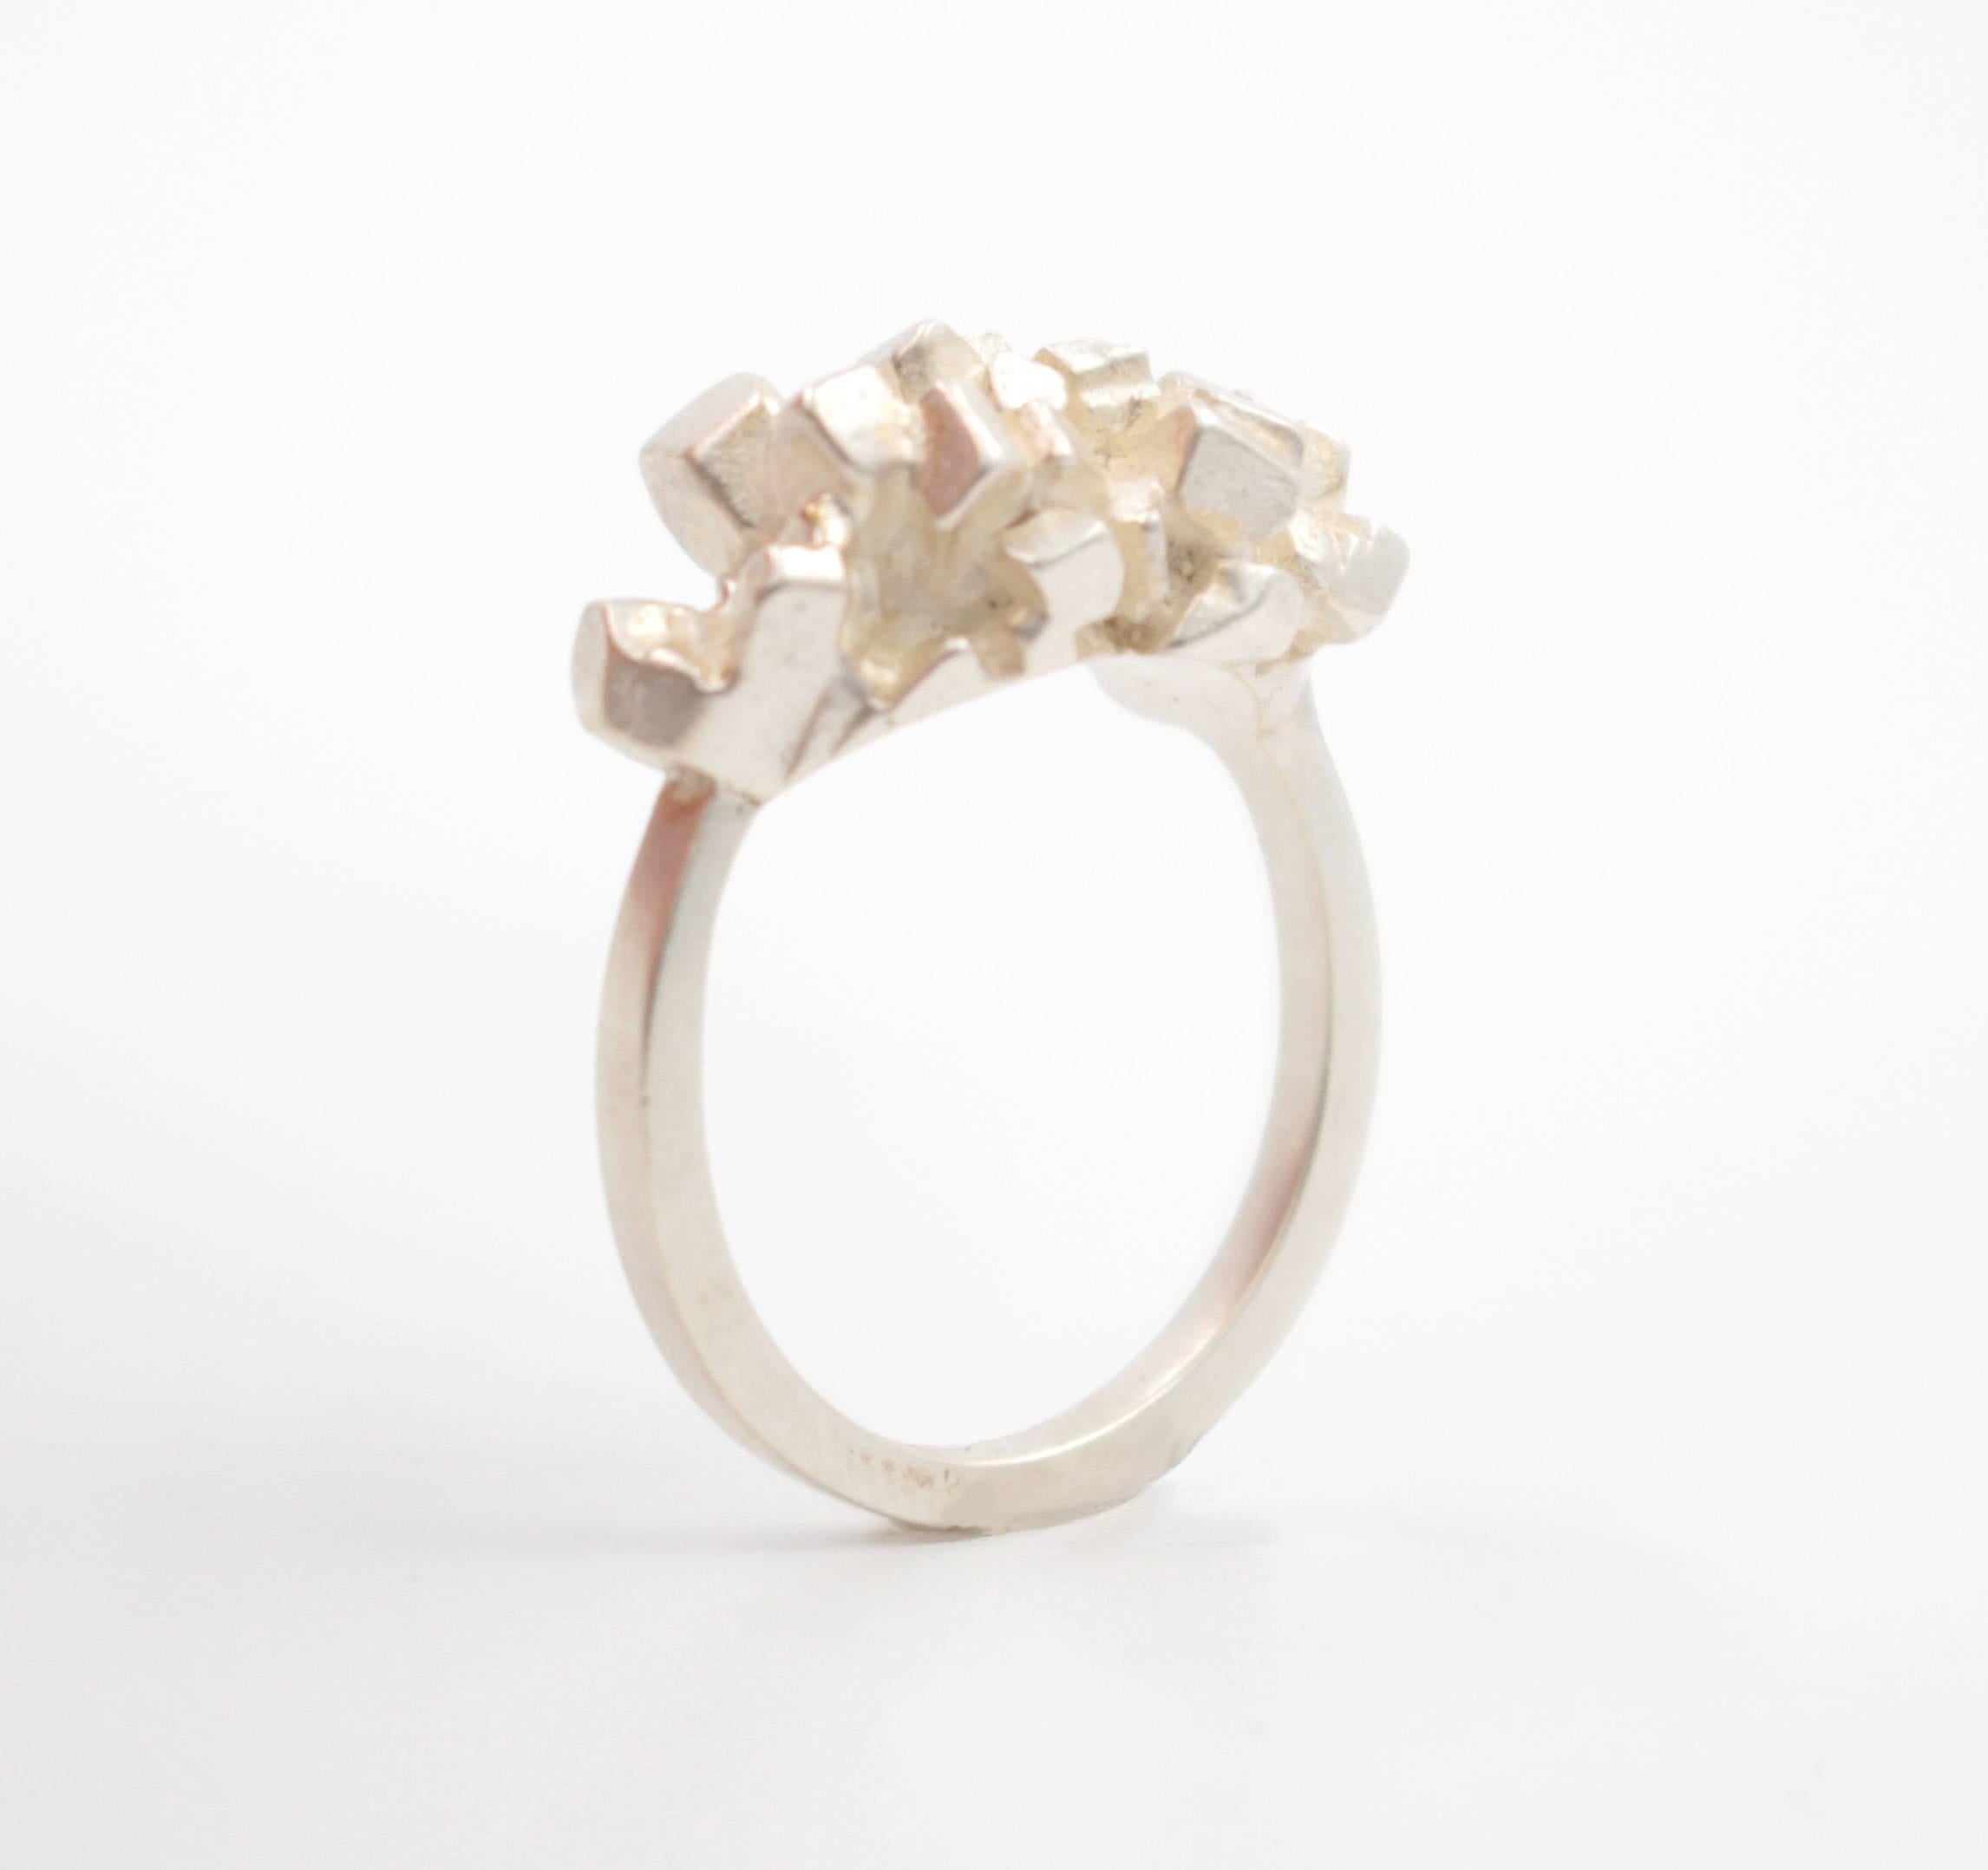 The Sweet Chunk Ring is a satin finished sterling silver ring with cluster of cubic shapes over the top of the ring. Size 7, can be sized to fit.